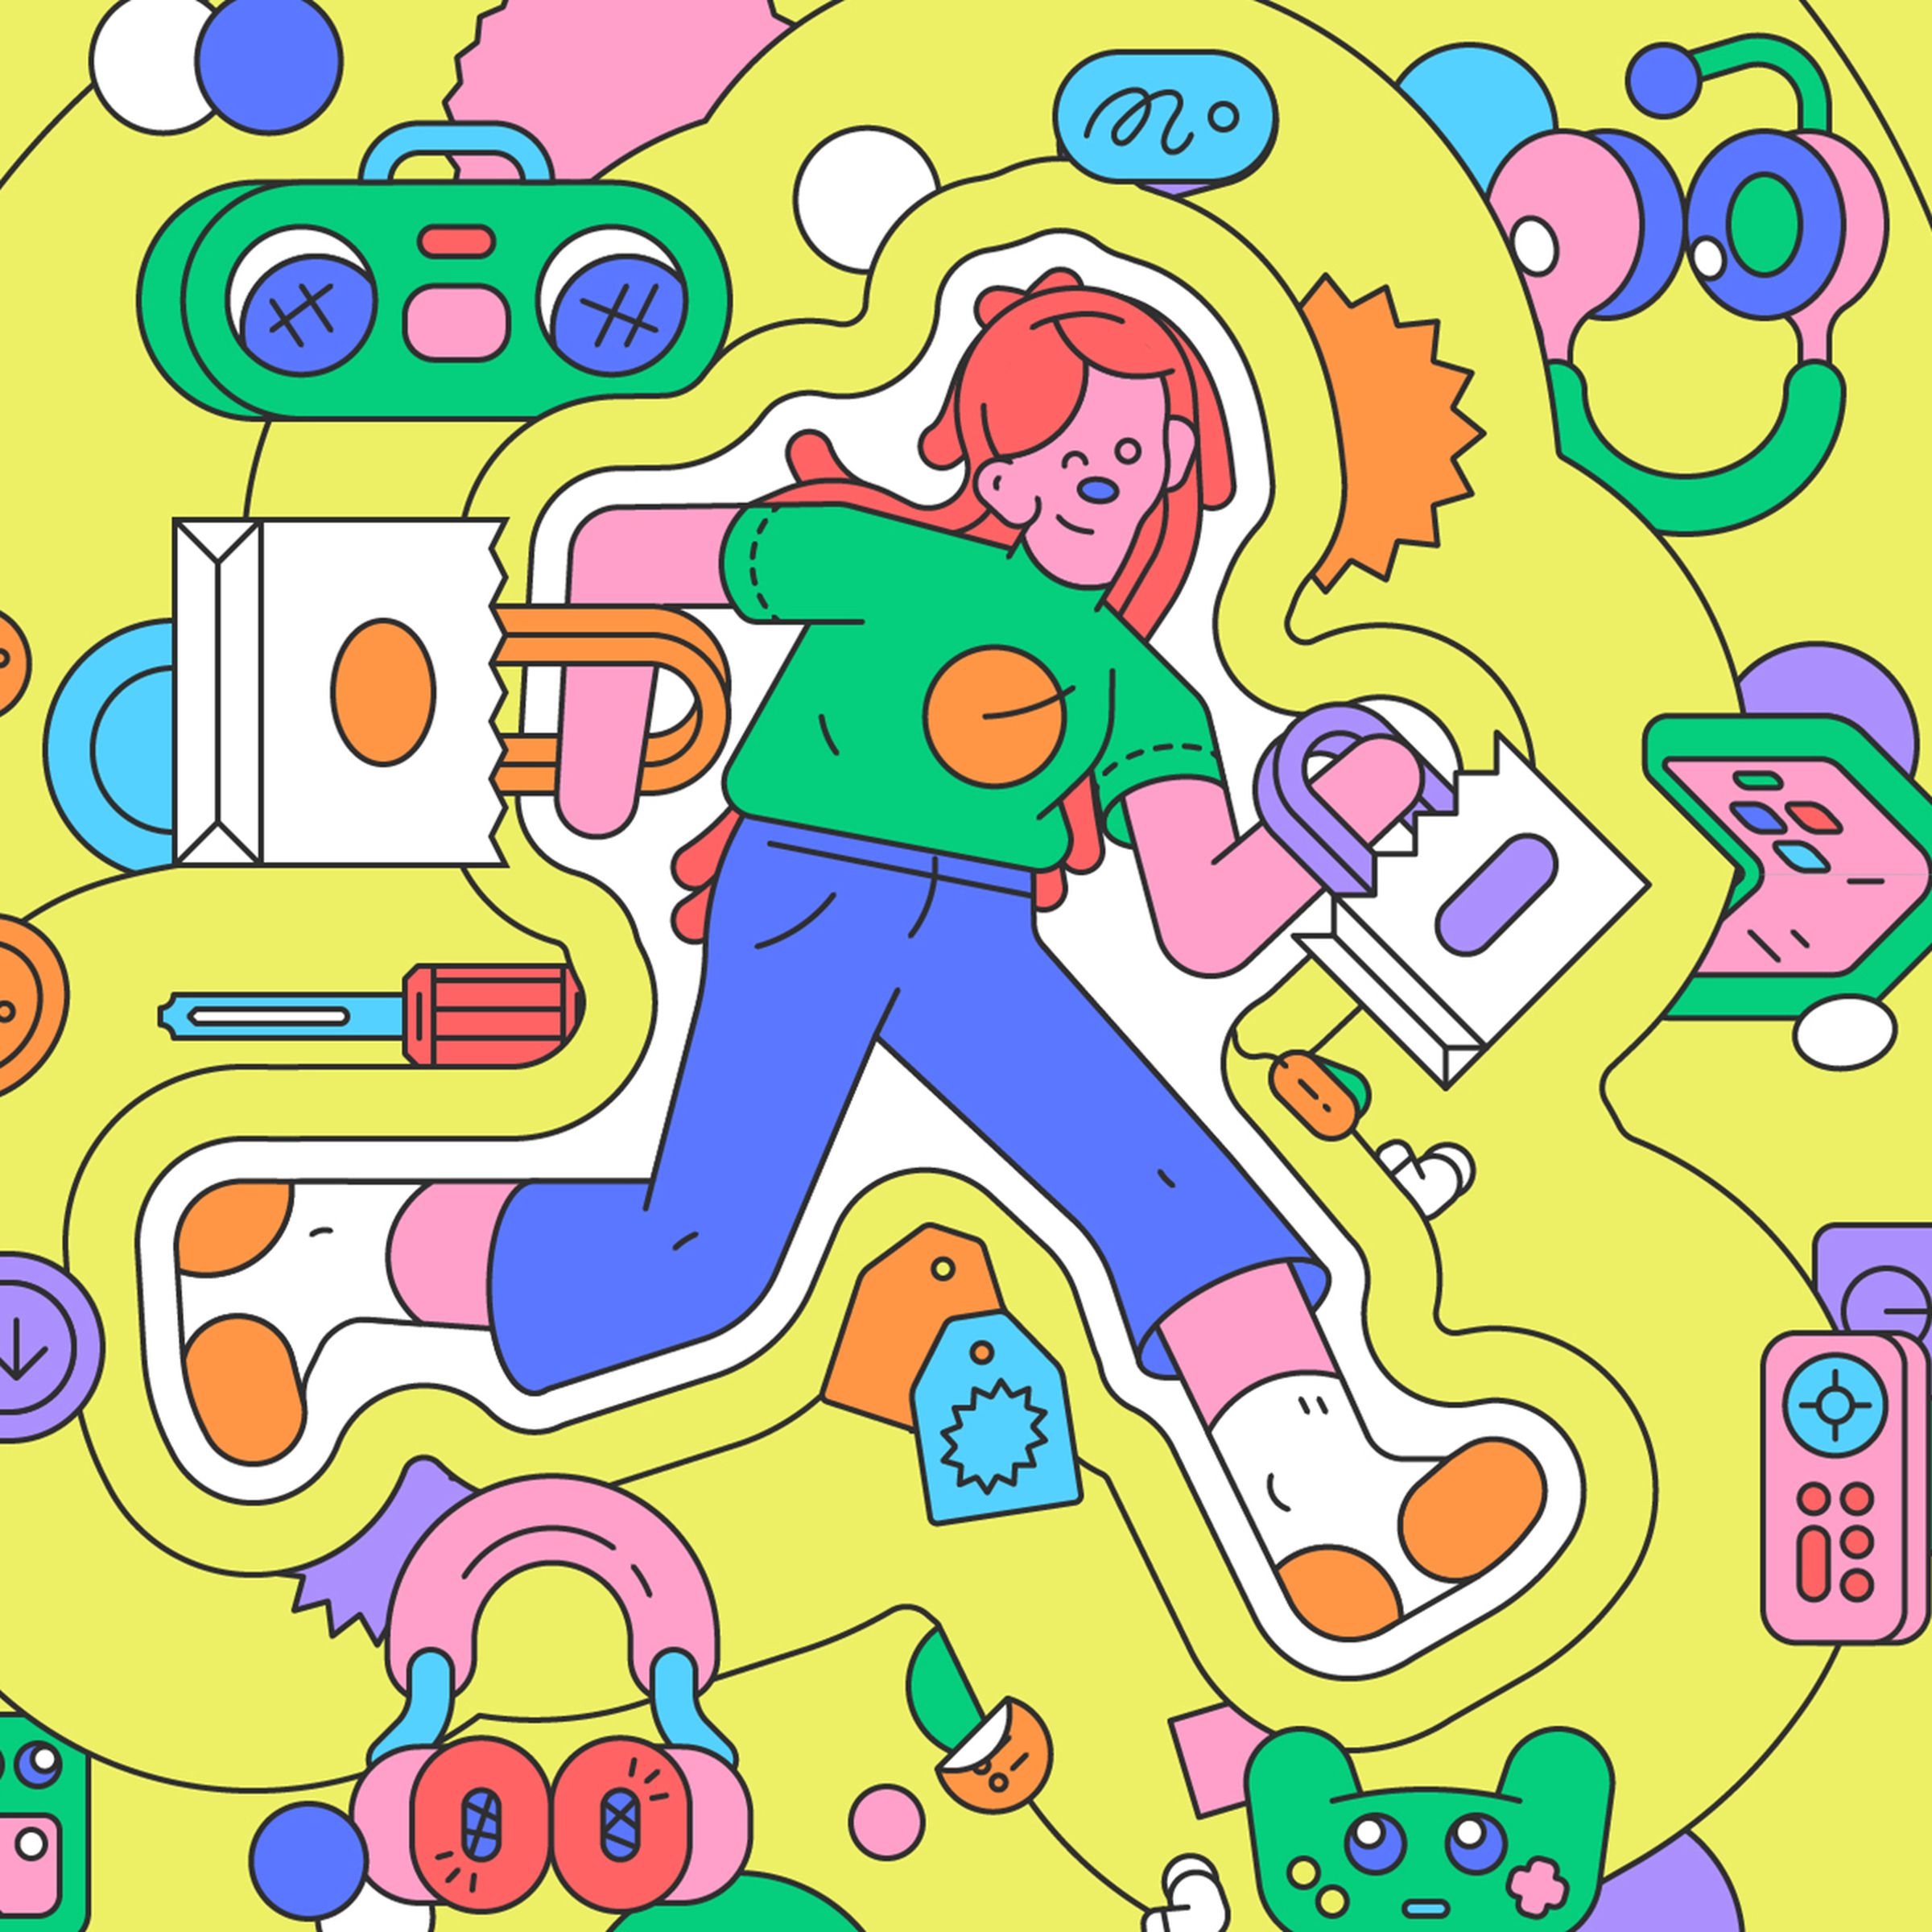 Brightly colored vector illustration of a person surrounded by Black Friday deals.